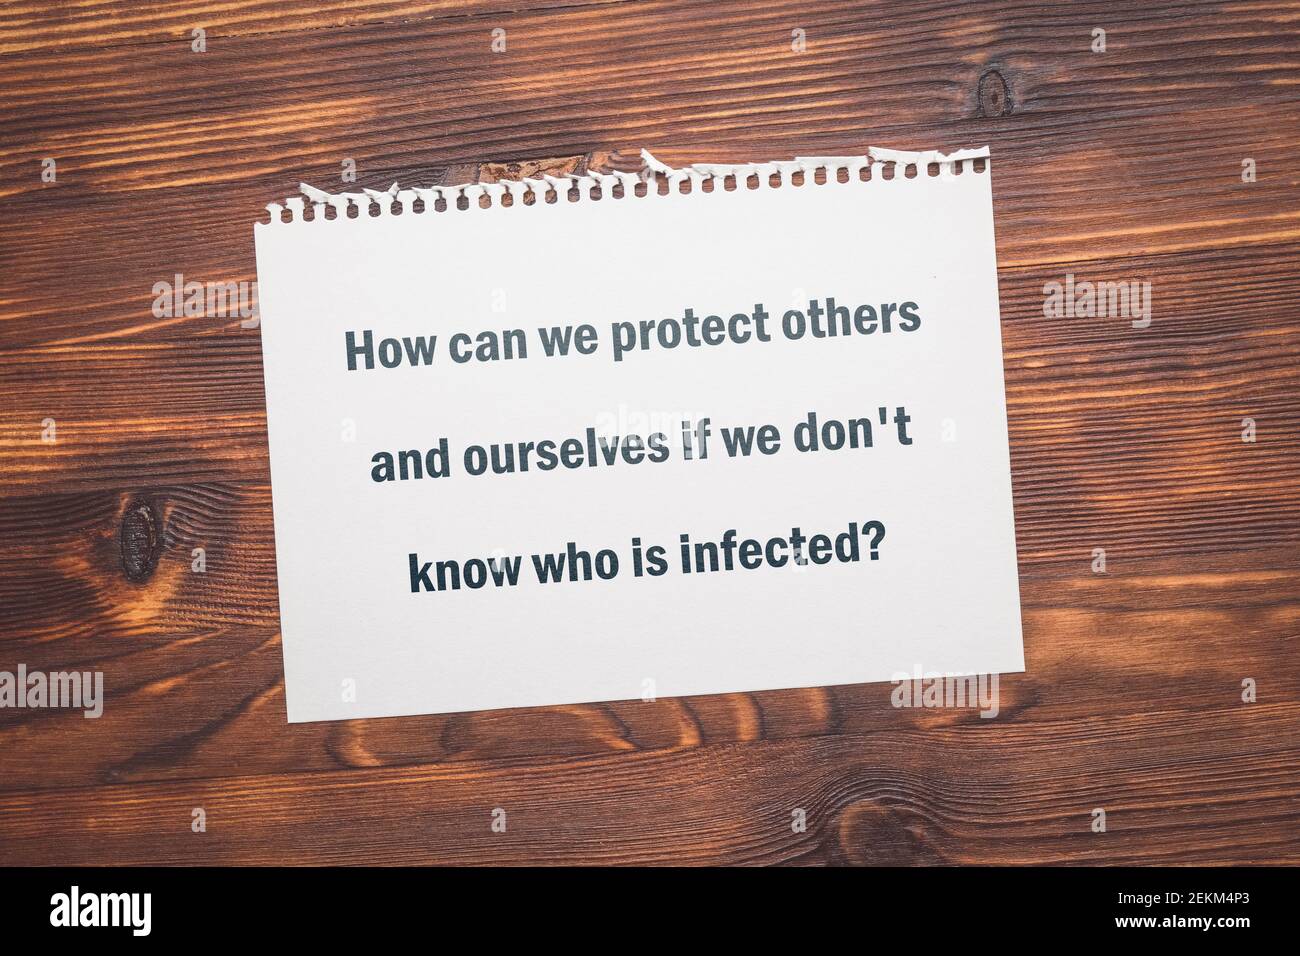 The question about coronavirus - How can we protect others and ourselves if we don't know who is infected. Stock Photo